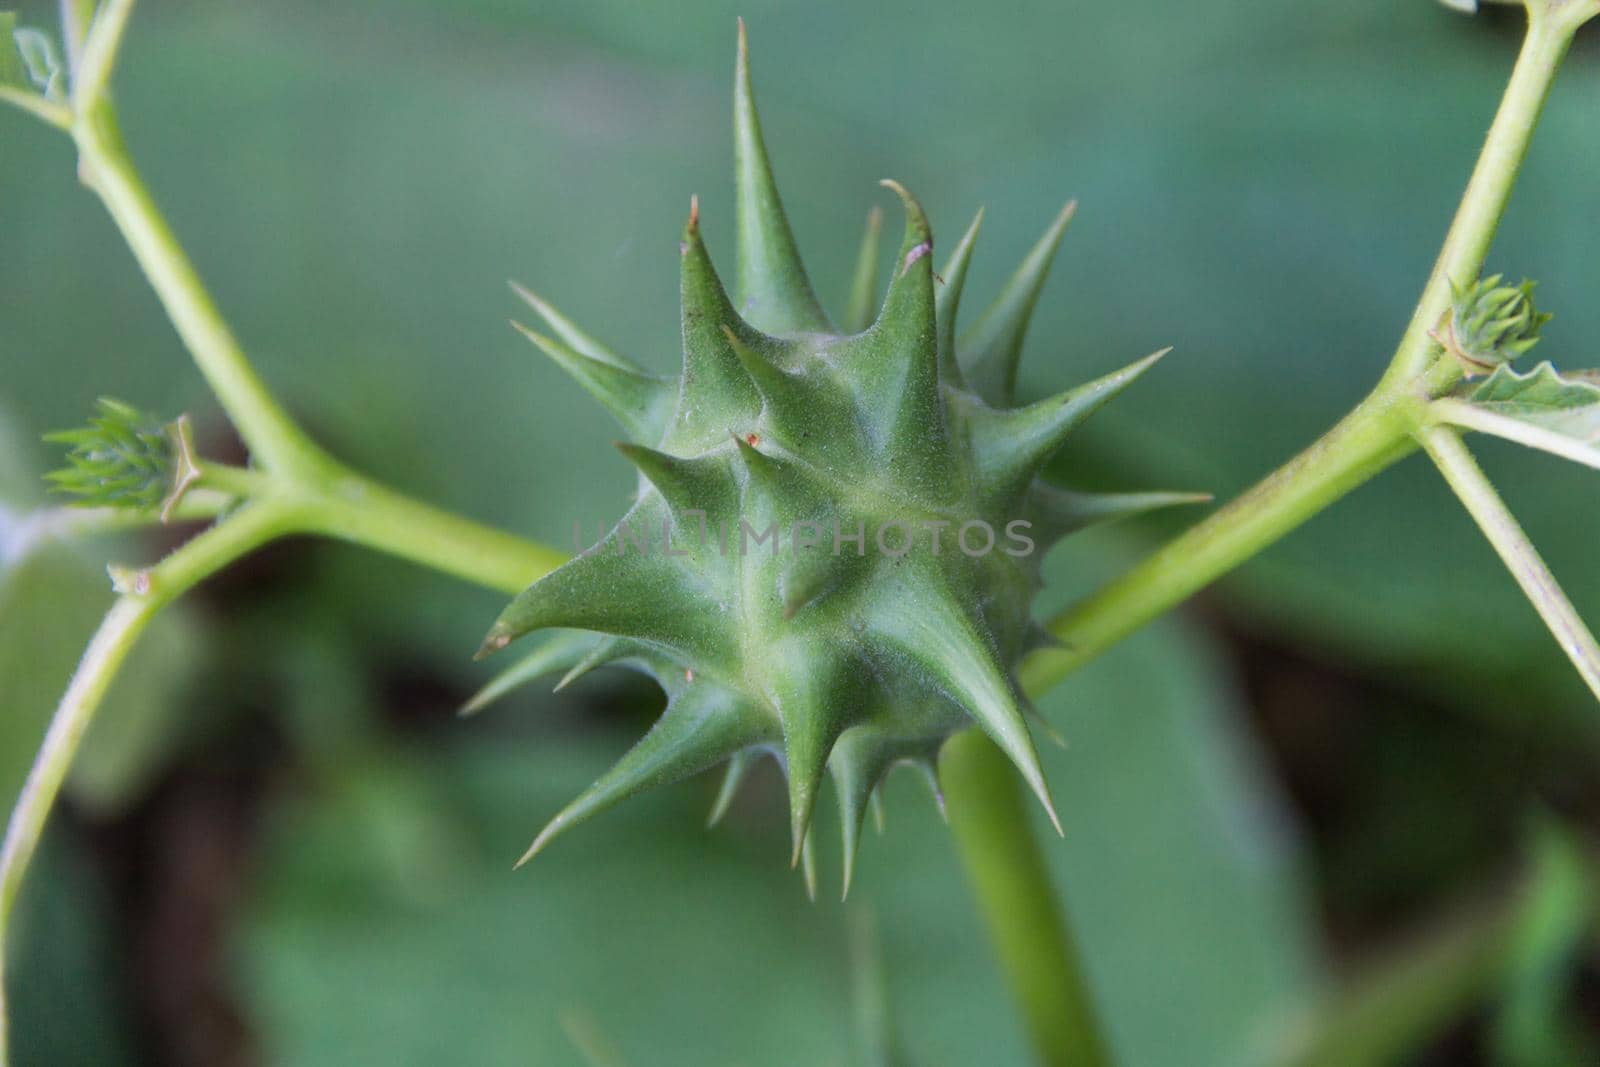 fruits of Datura ferox that grow wild, known as toloache or chamico